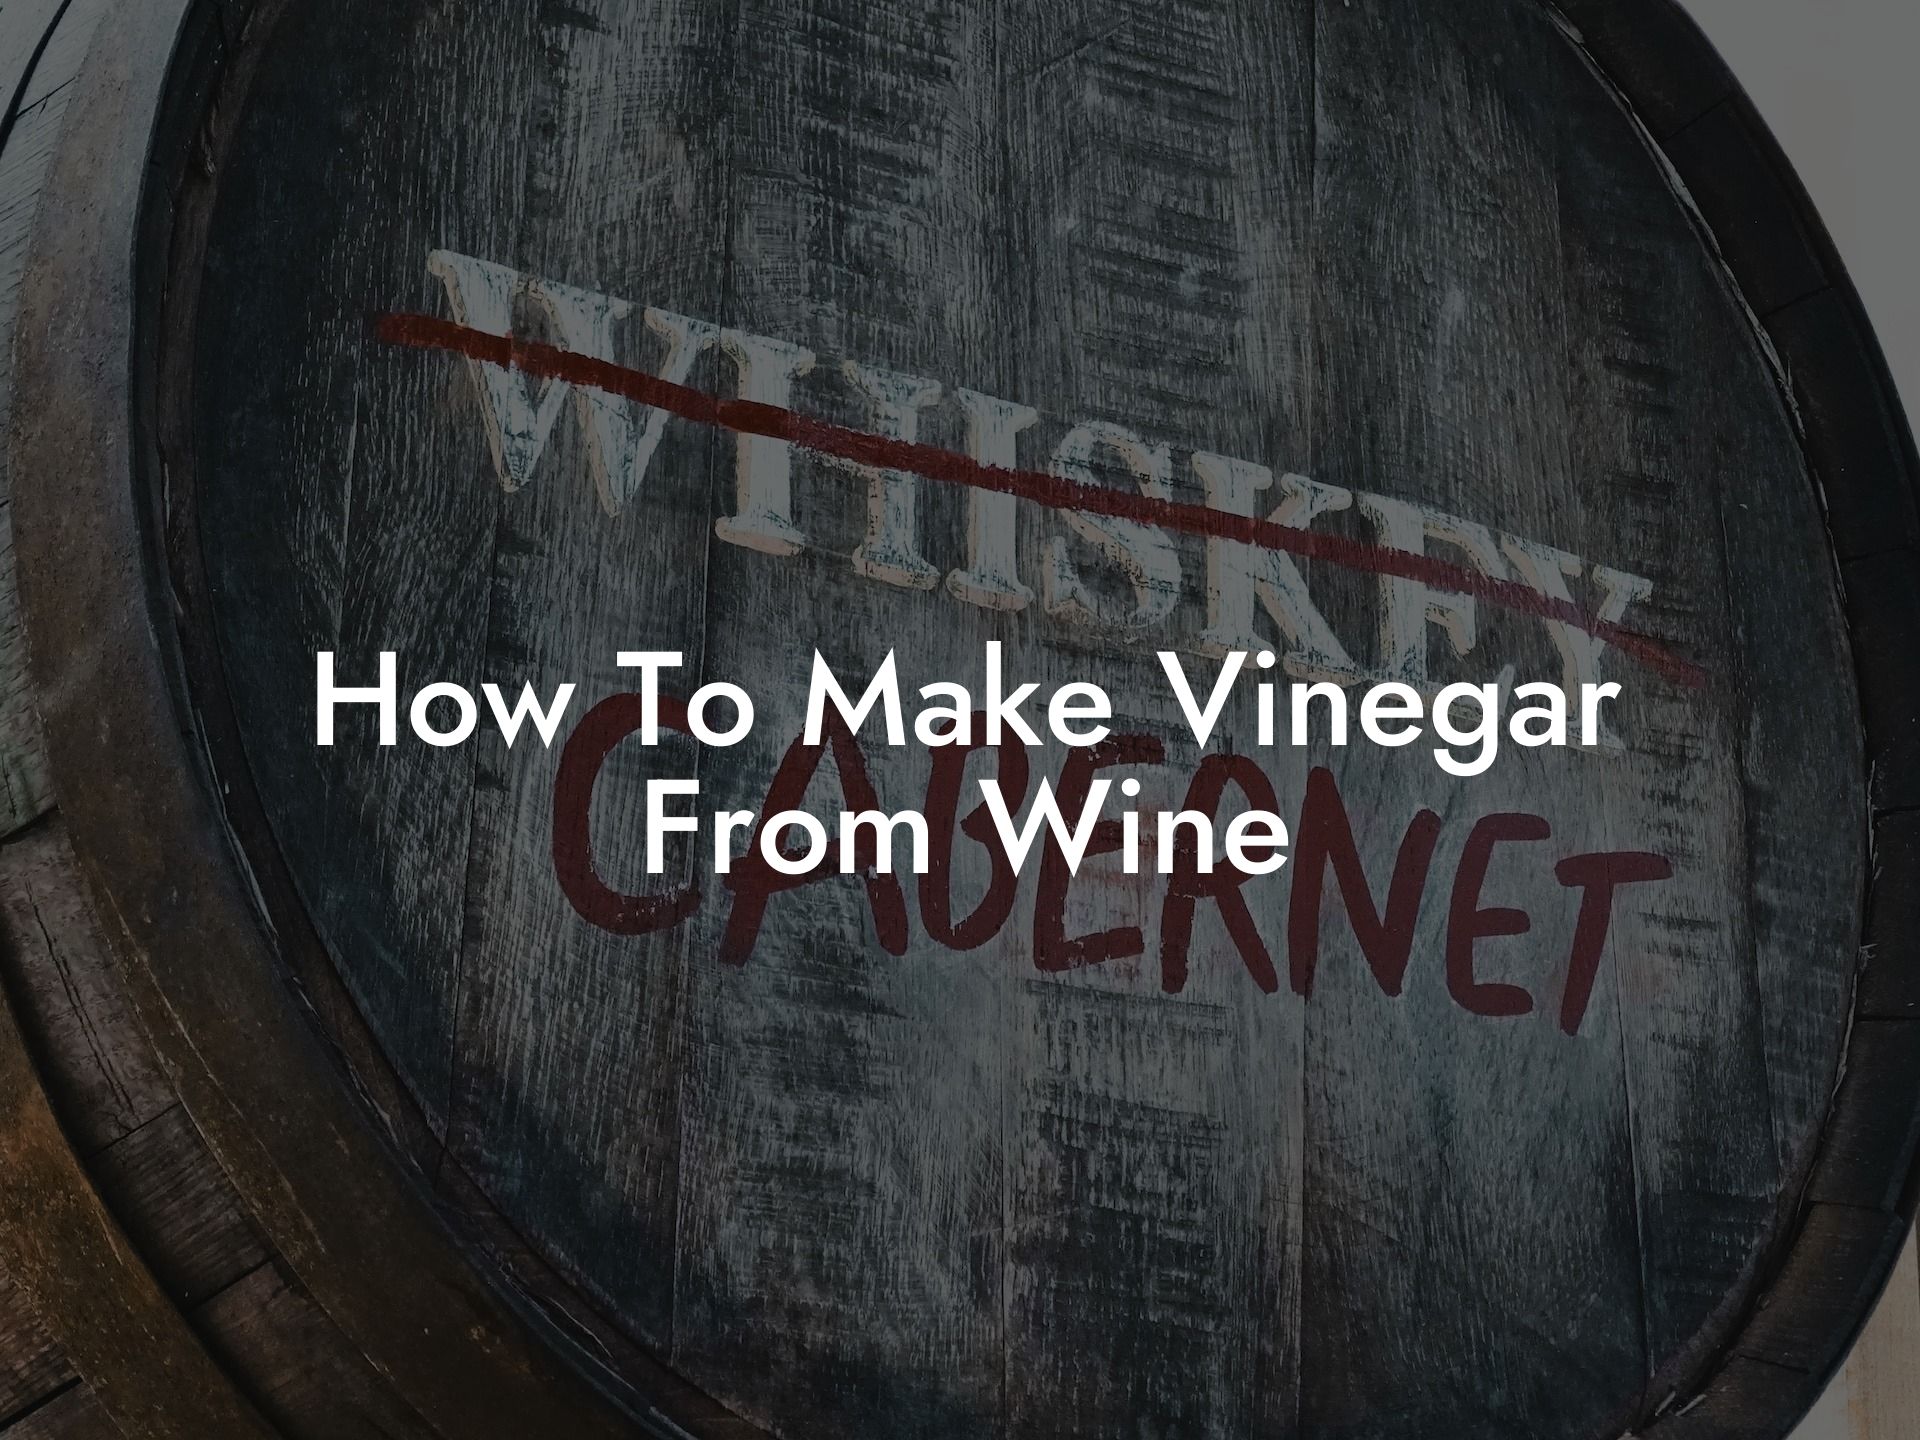 How To Make Vinegar From Wine